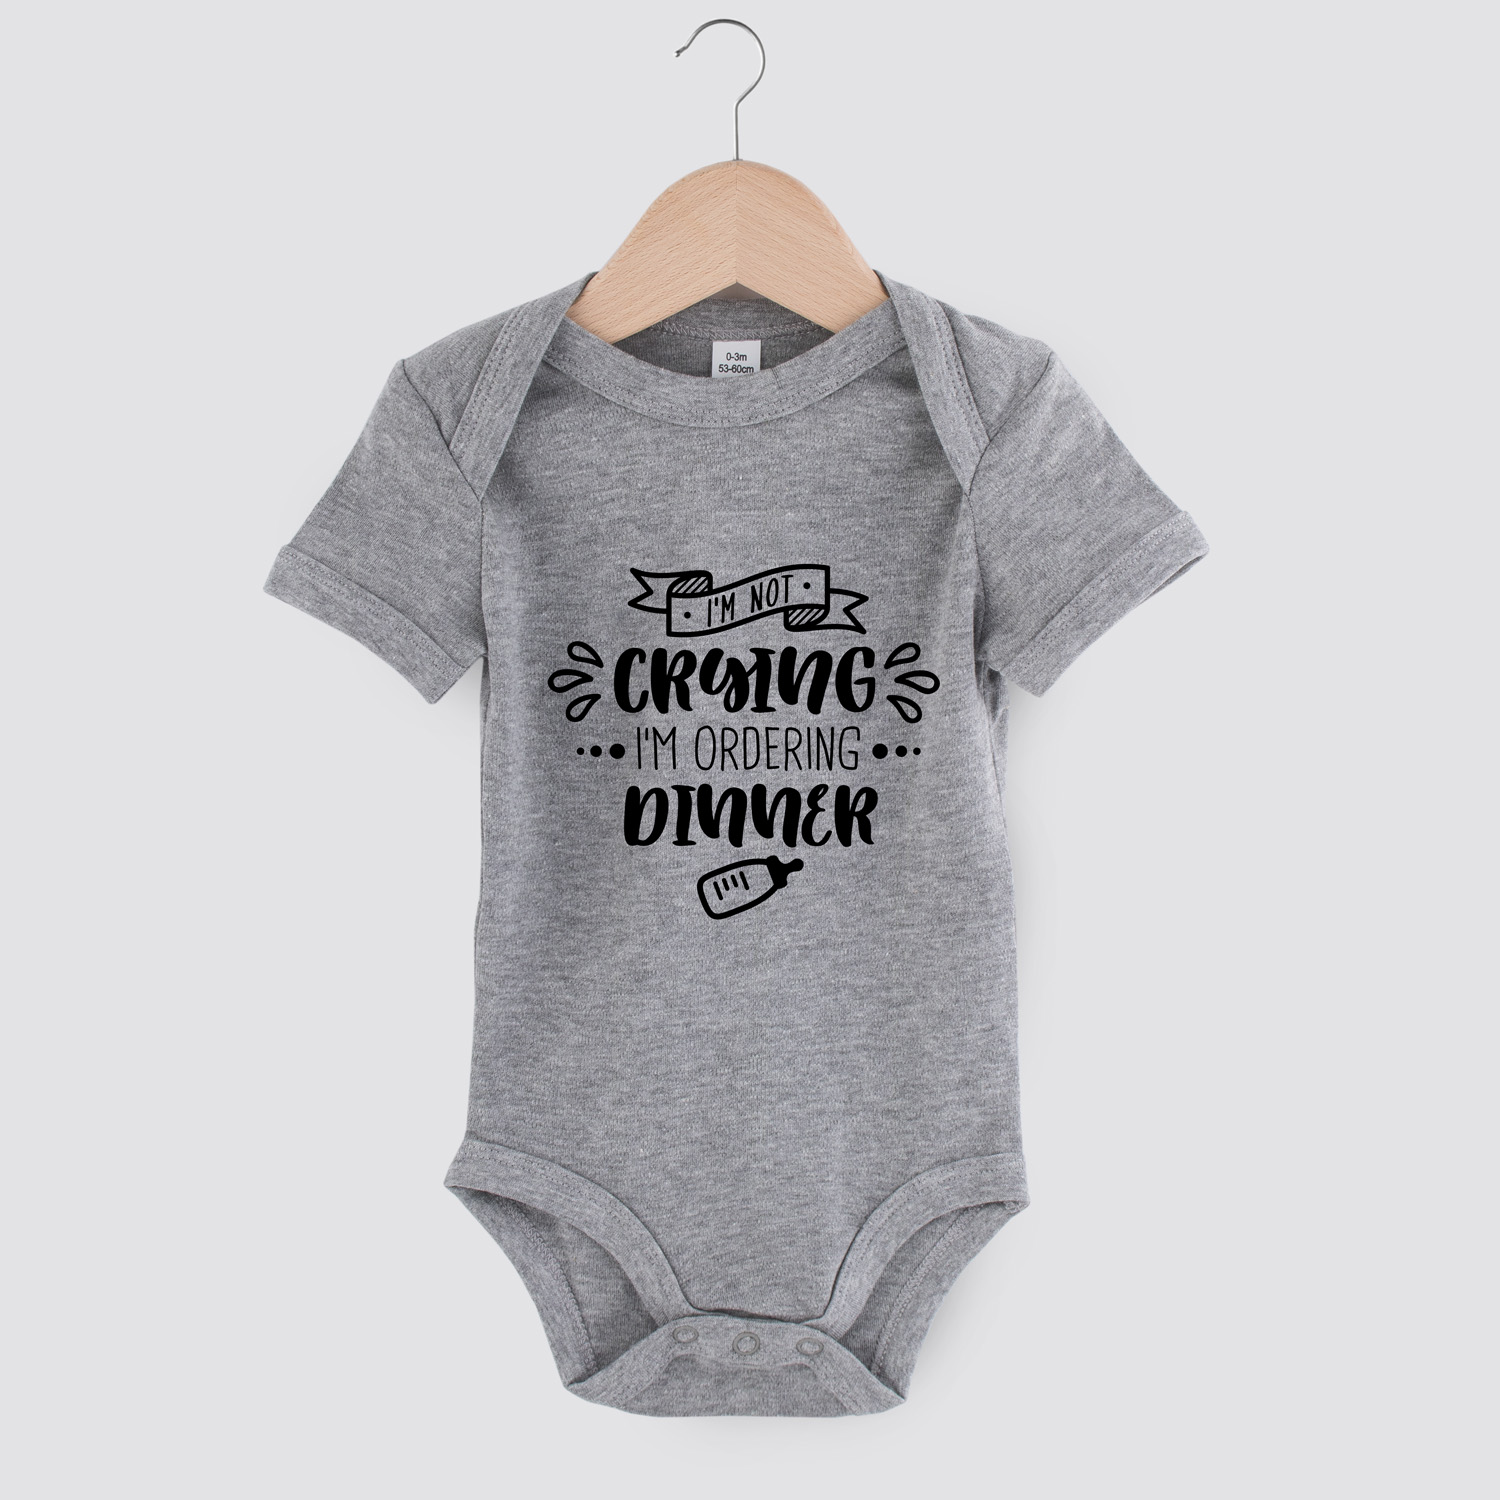 I'm not crying I'm ordering dinner | Baby romper | my fabulous life.